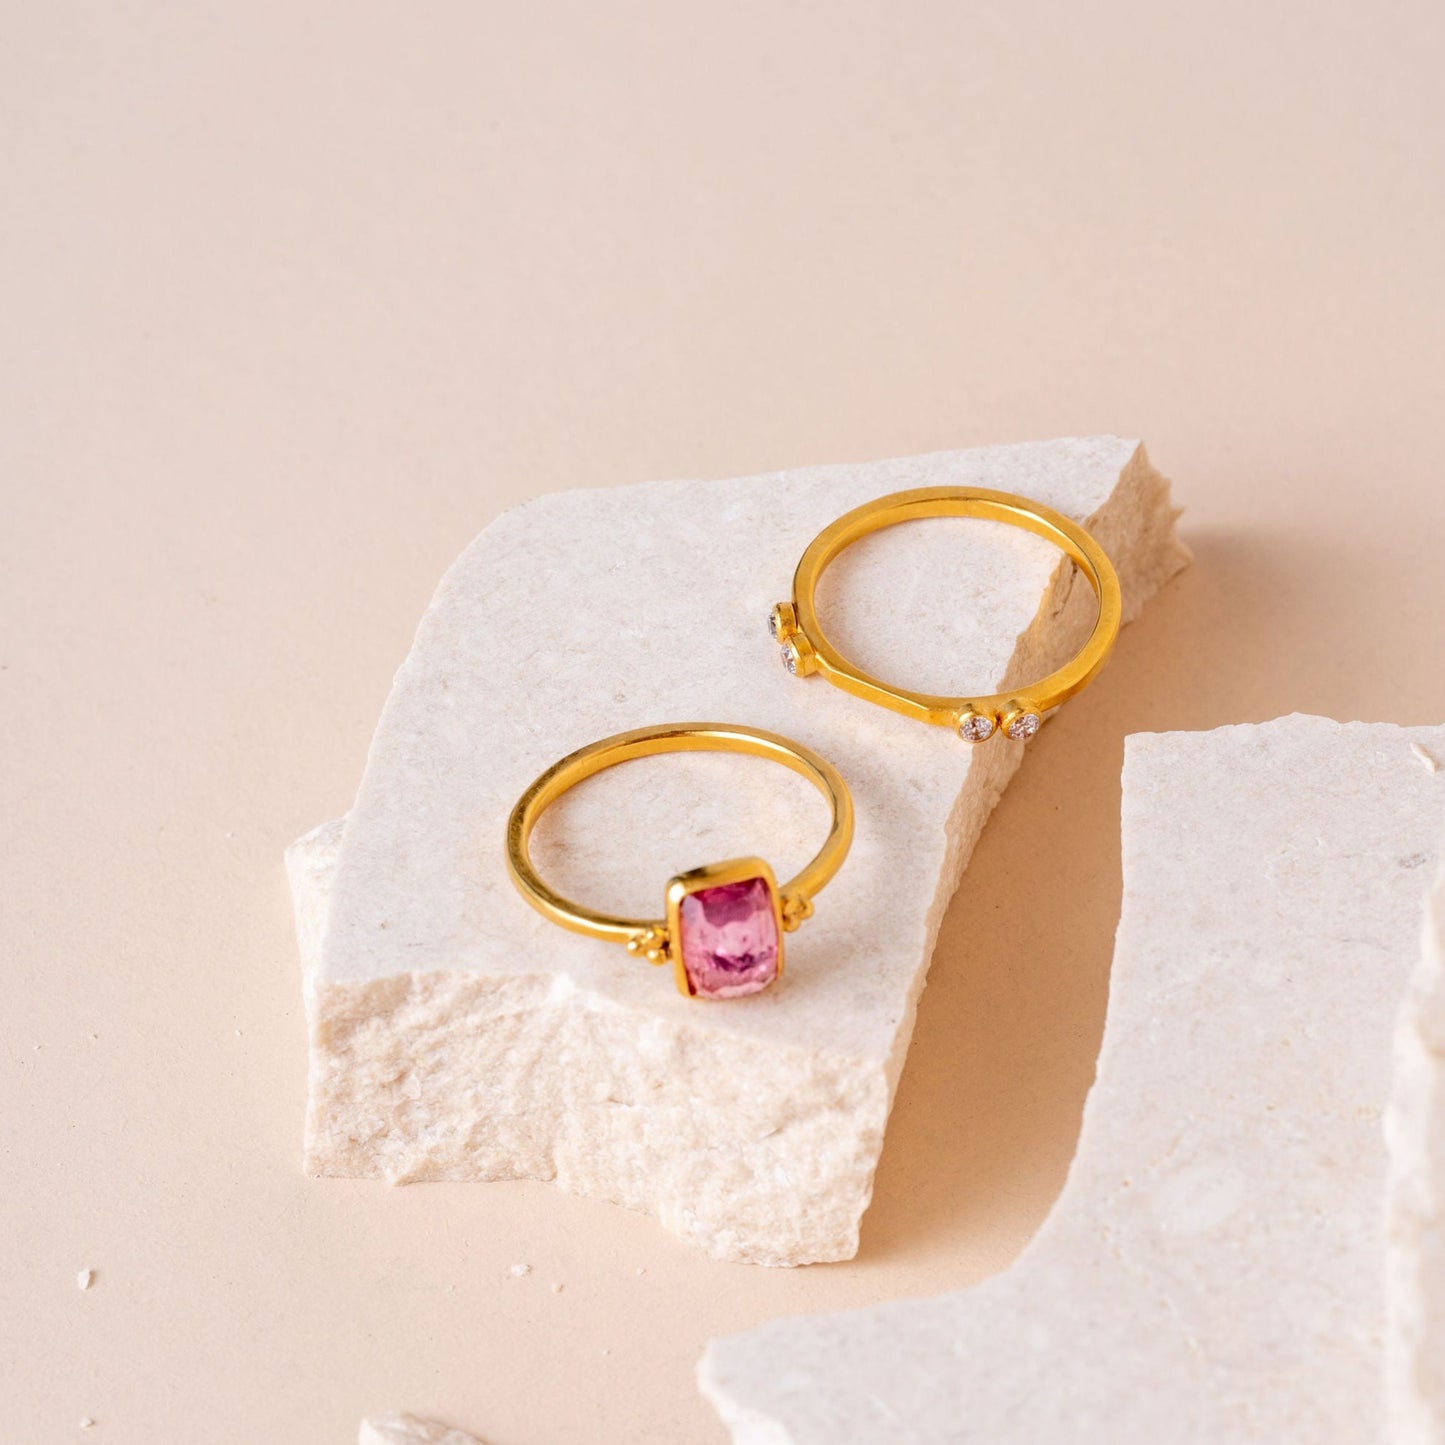 Handmade gold ring showcasing a delicate pink tourmaline and granulation accents